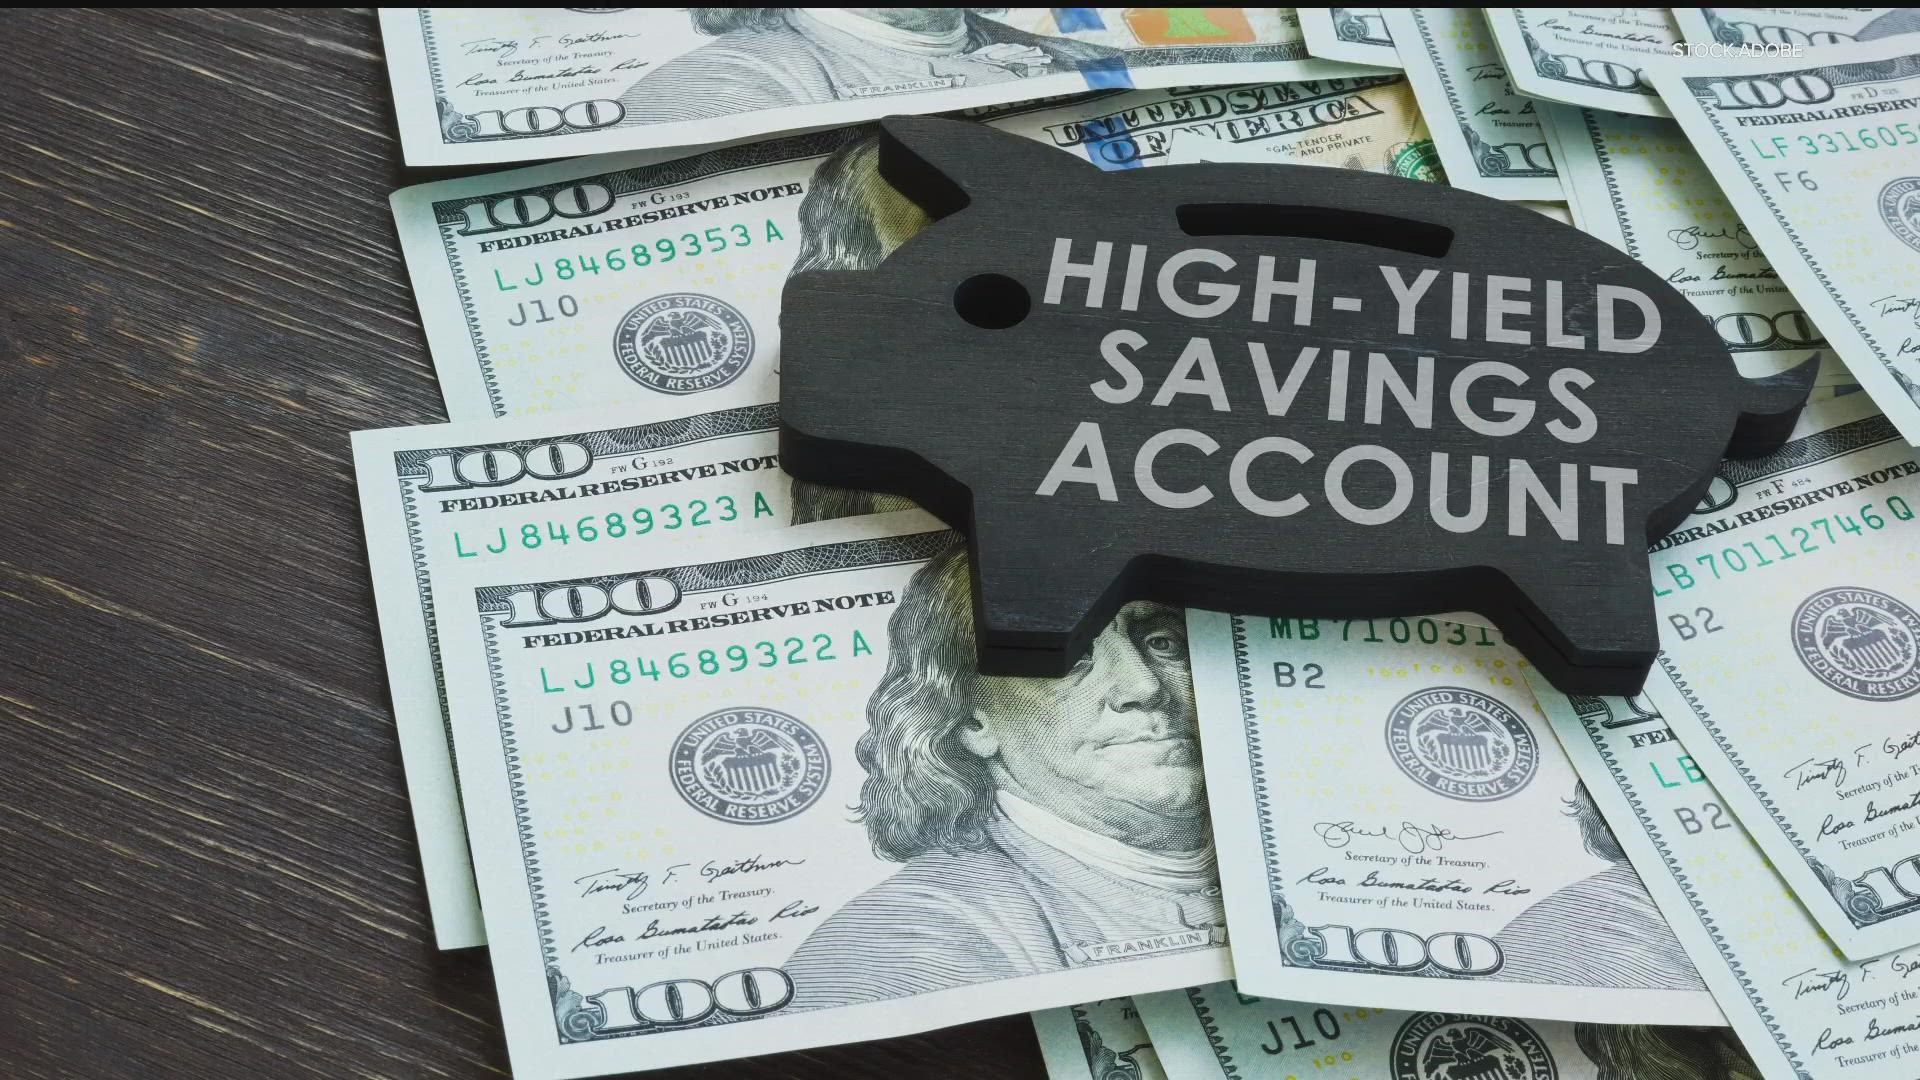 These accounts are just like traditional savings accounts except they offer much better rates of return.